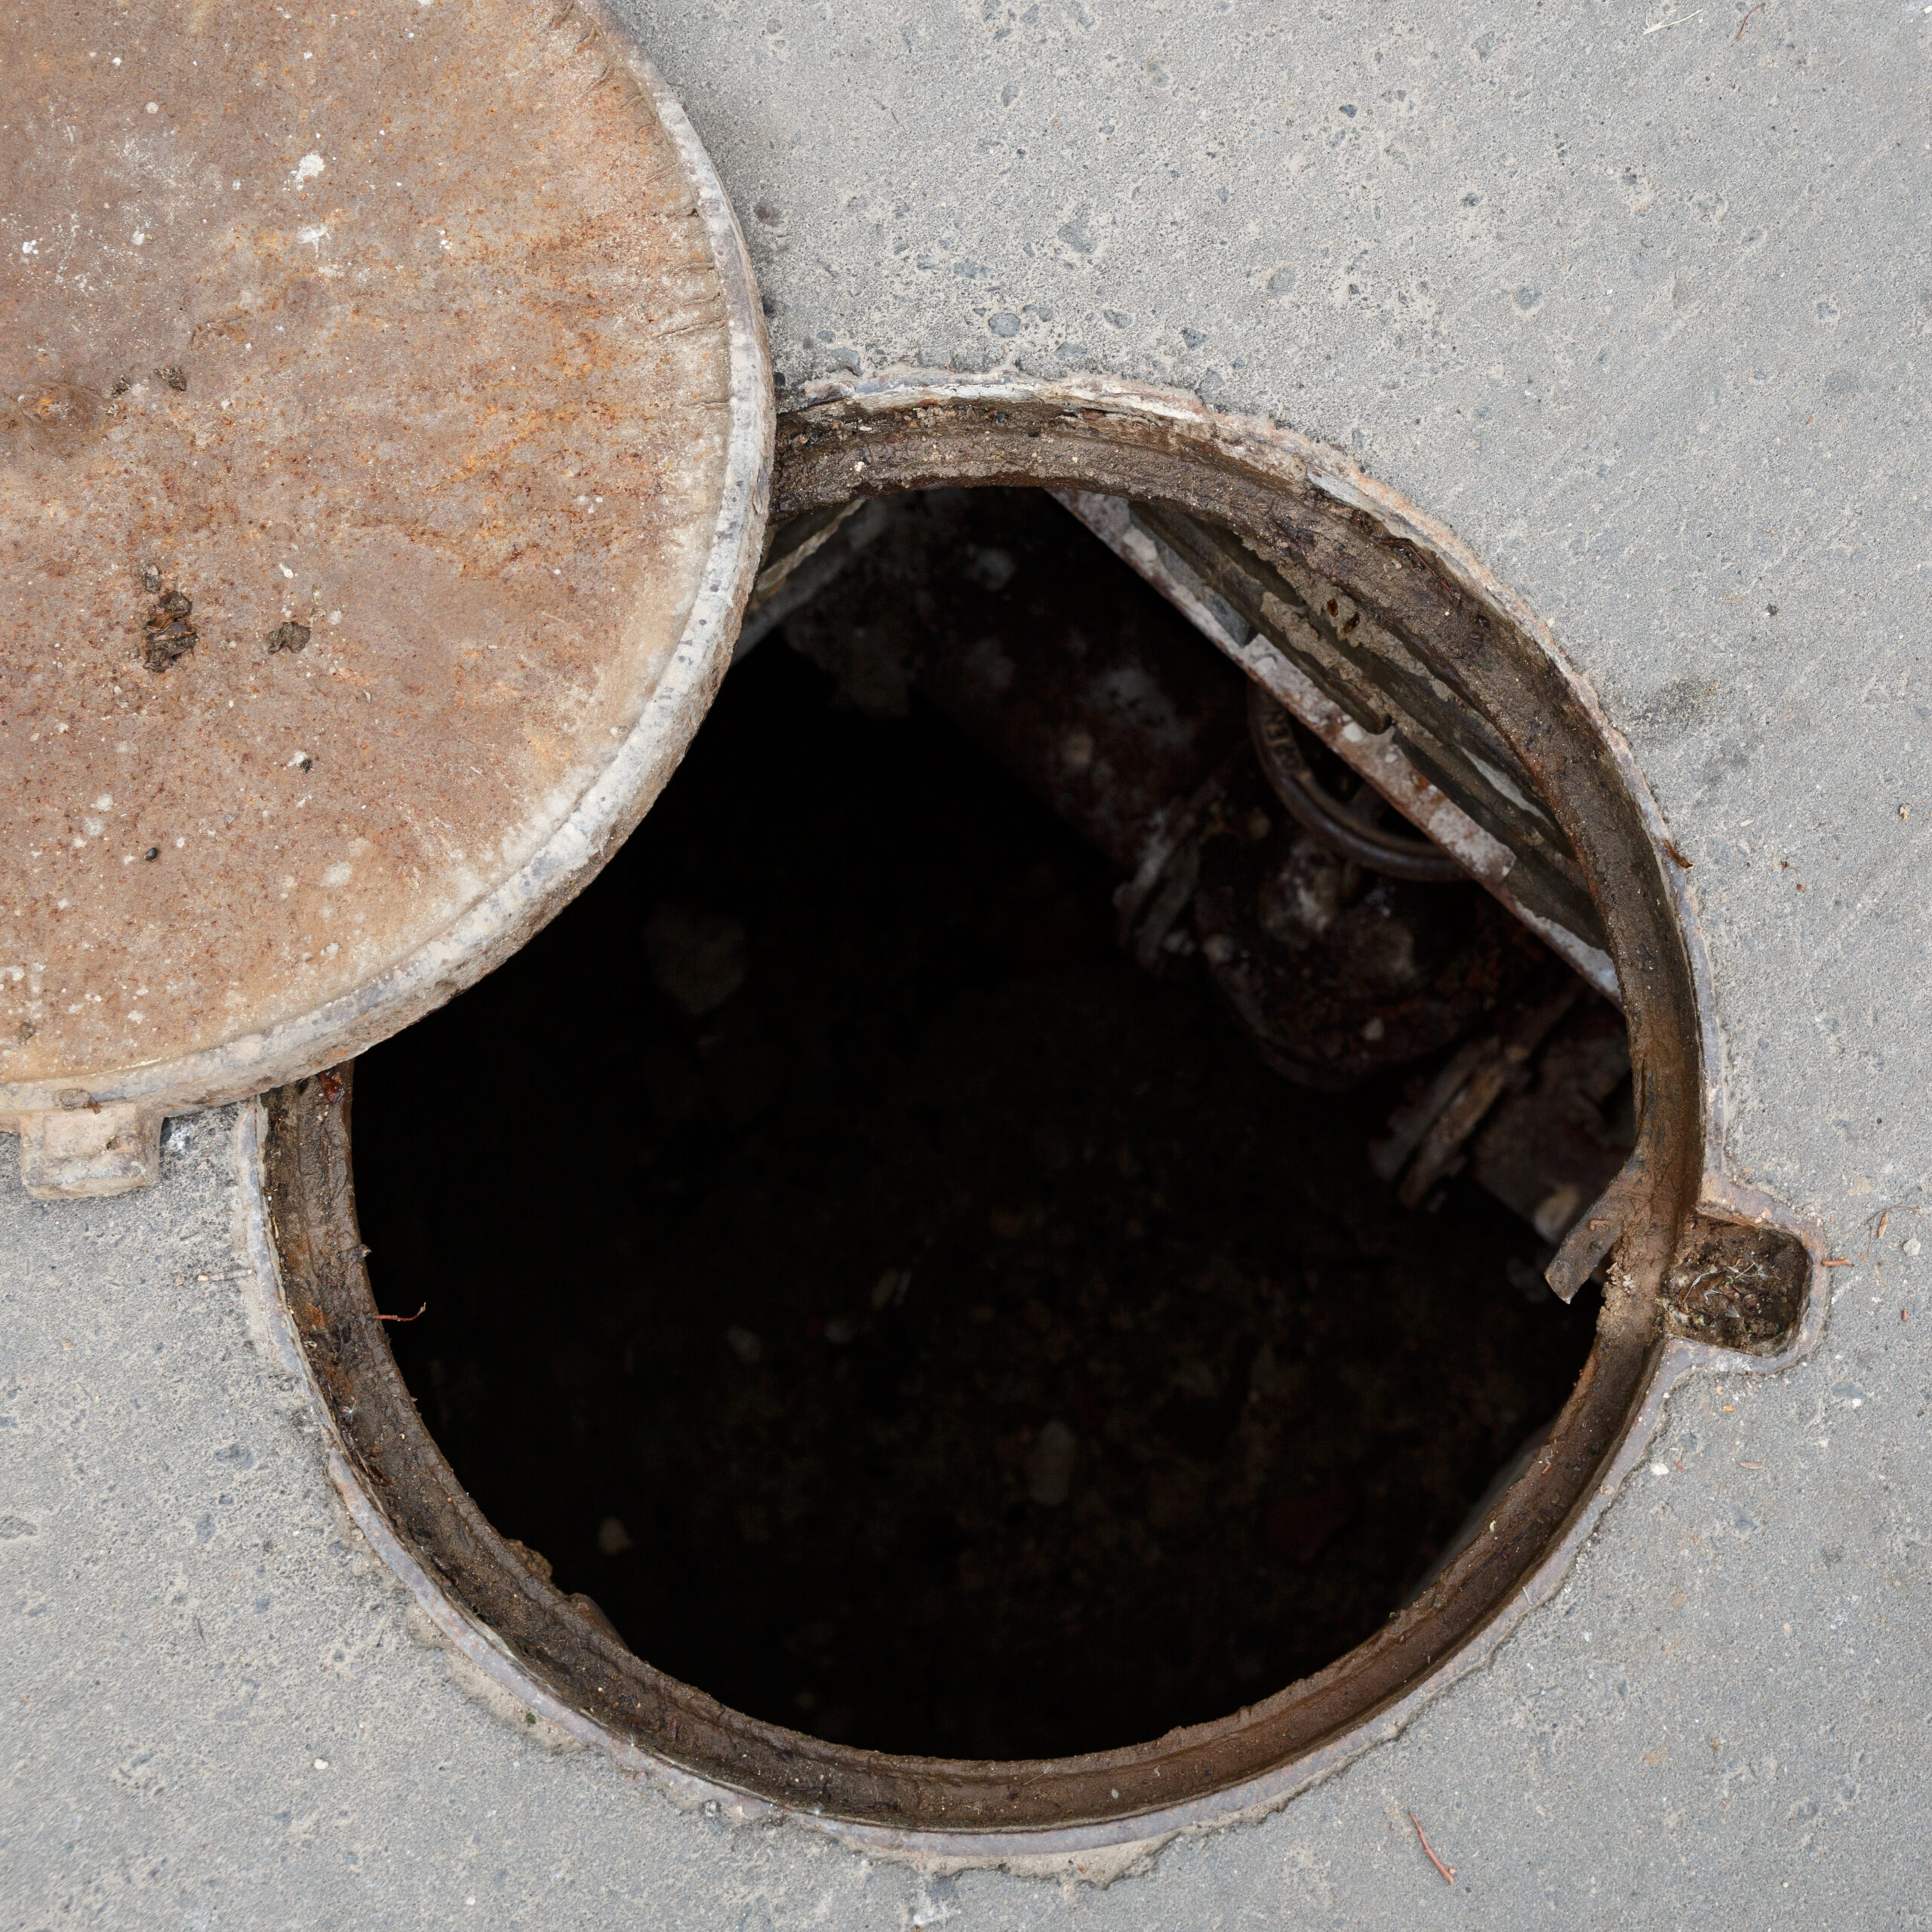 An opened drainage